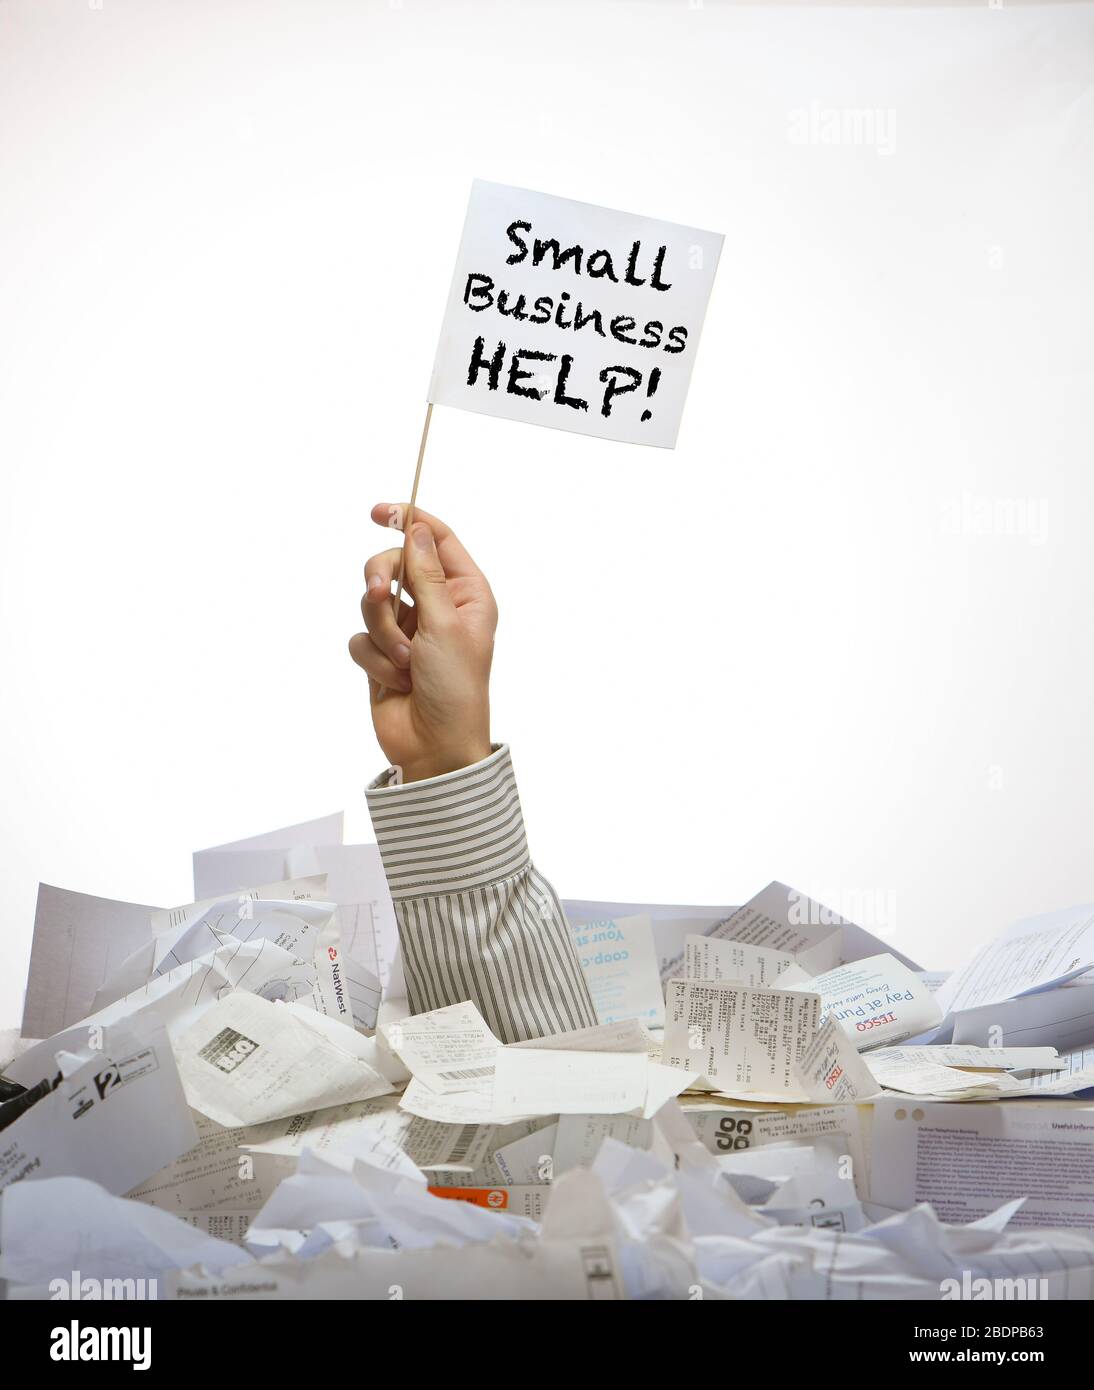 Concept image of a arm pushing up through a pile of receipts with a white flag with small business message on it under business pressure from Covid-19 Stock Photo